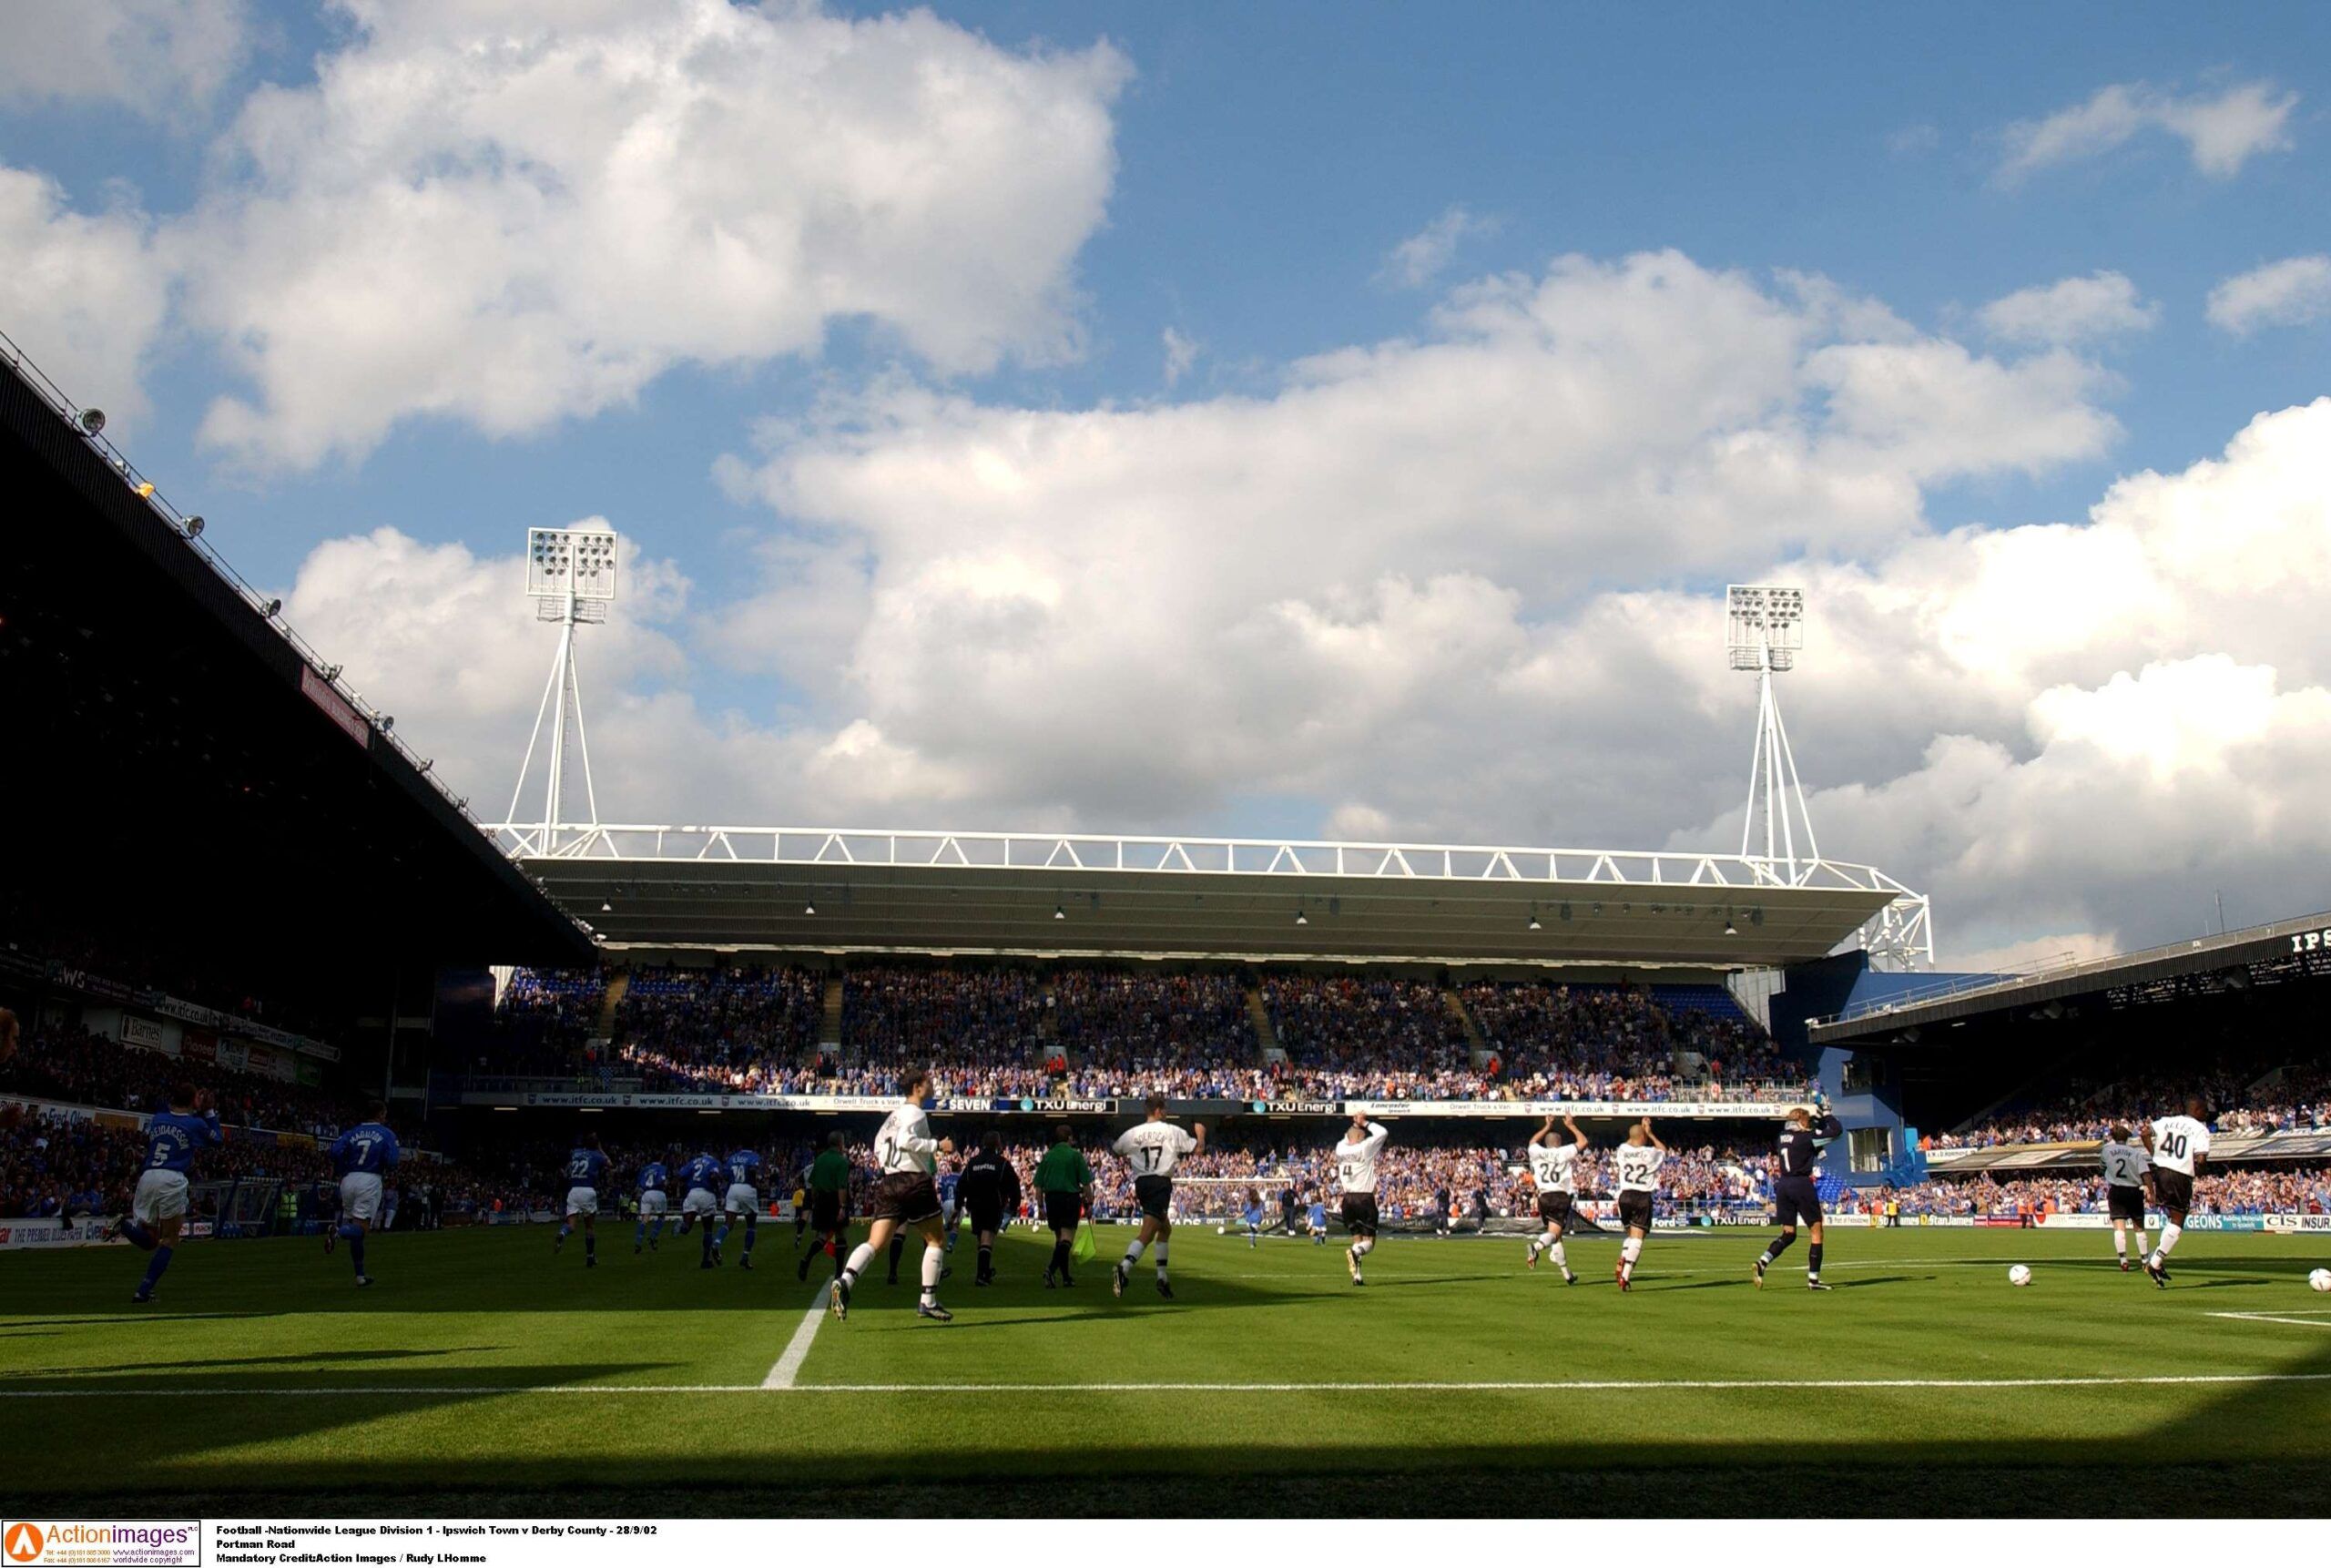 Football -Nationwide League Division 1 - Ipswich Town v Derby County - 28/9/02 
Portman Road 
Mandatory Credit:Action Images / Rudy LHomme